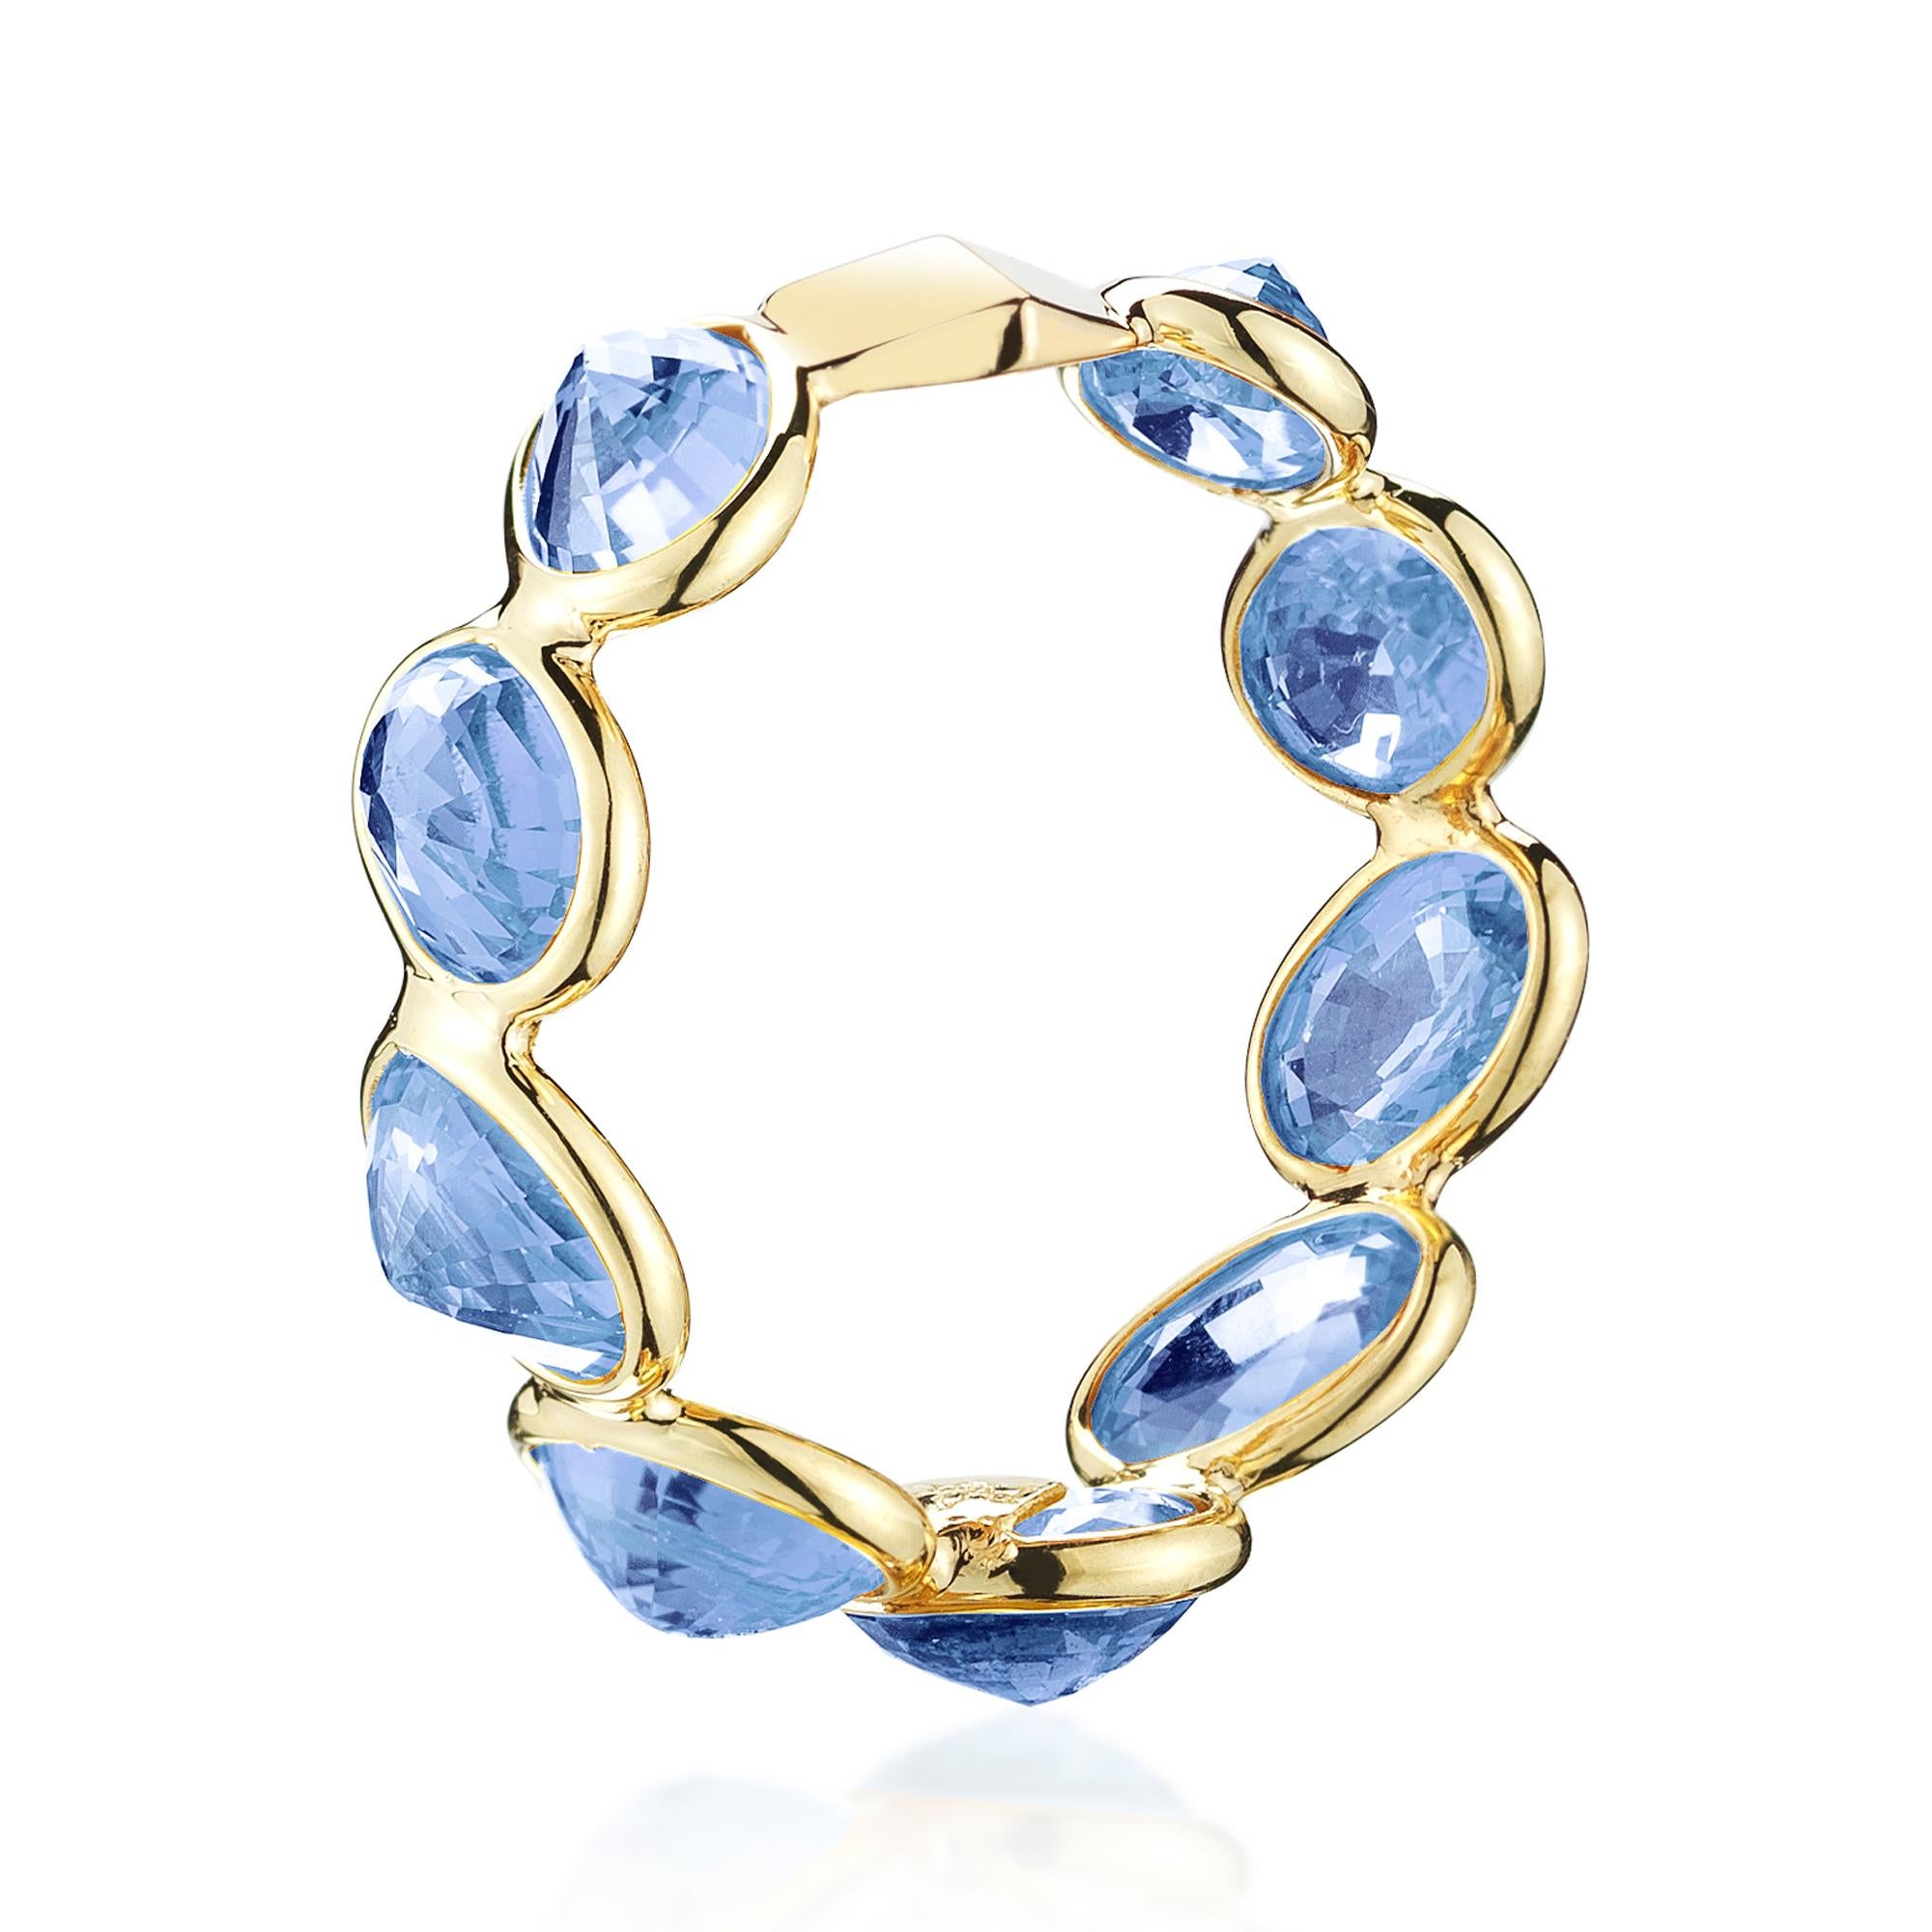 The 18kt yellow gold Ombré band set with multishade oval blue sapphires at 11 o'clock® with signature Brillante® motif.

An ode to the Mediterranean Sea, Paolo Costagli crafts sparkling blue sapphires into a ring made with 18kt yellow gold. The ring